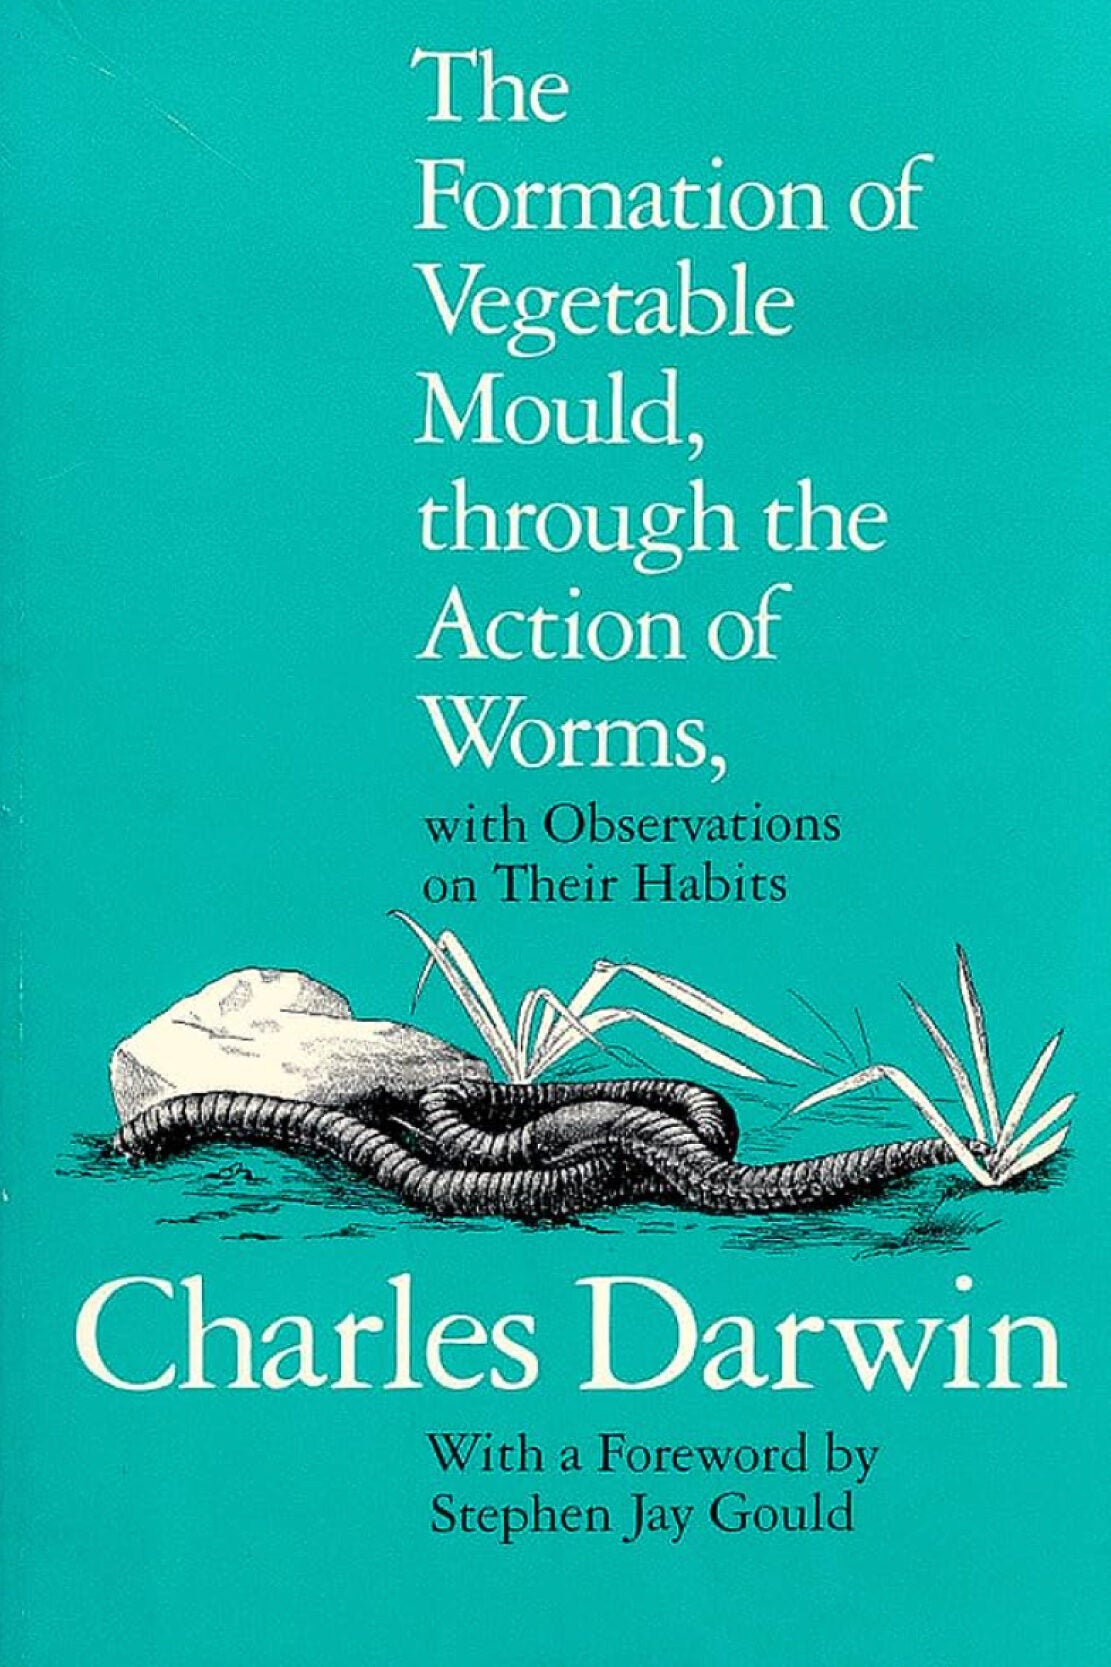 Book cover: "The Formation of Vegetable Mould Through the Action of Worms."